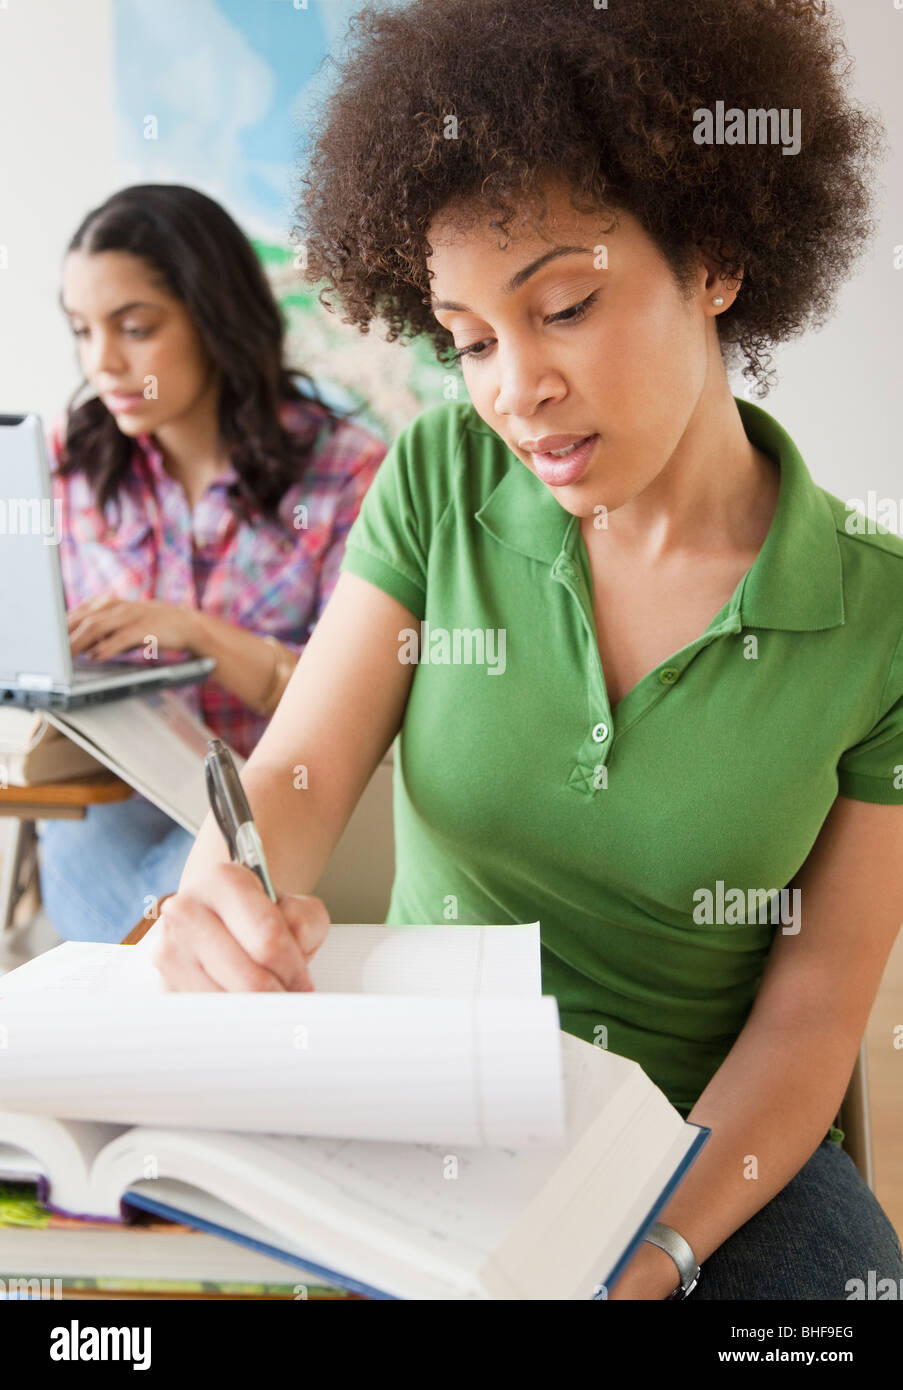 Mixed race woman taking notes in college classroom Stock Photo